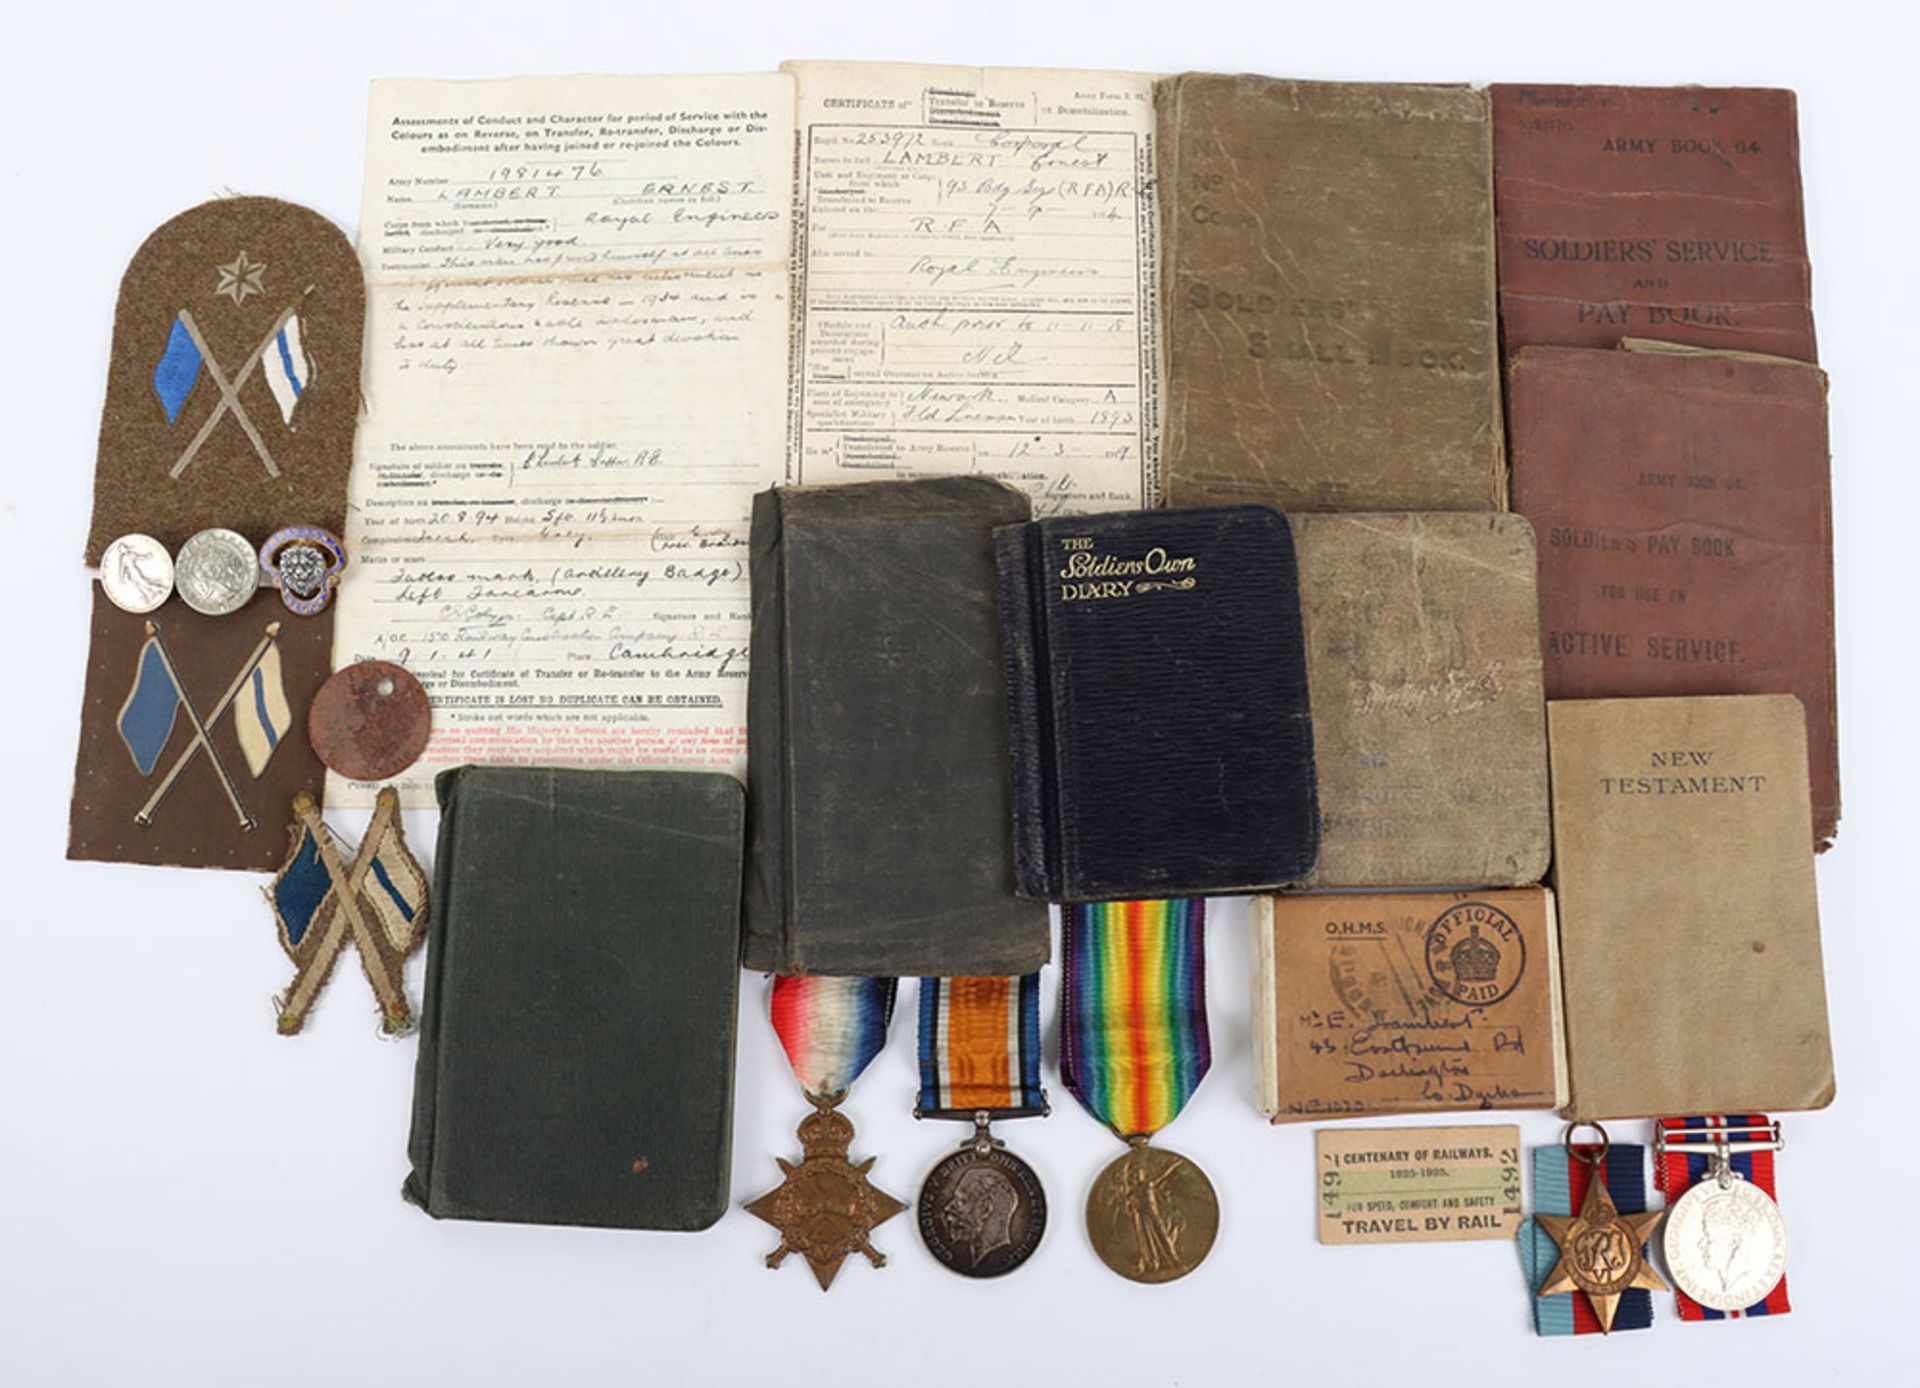 WW1 Medal Group of Five Covering Service Across Both World Wars, Accompanied by an Extremely Impress